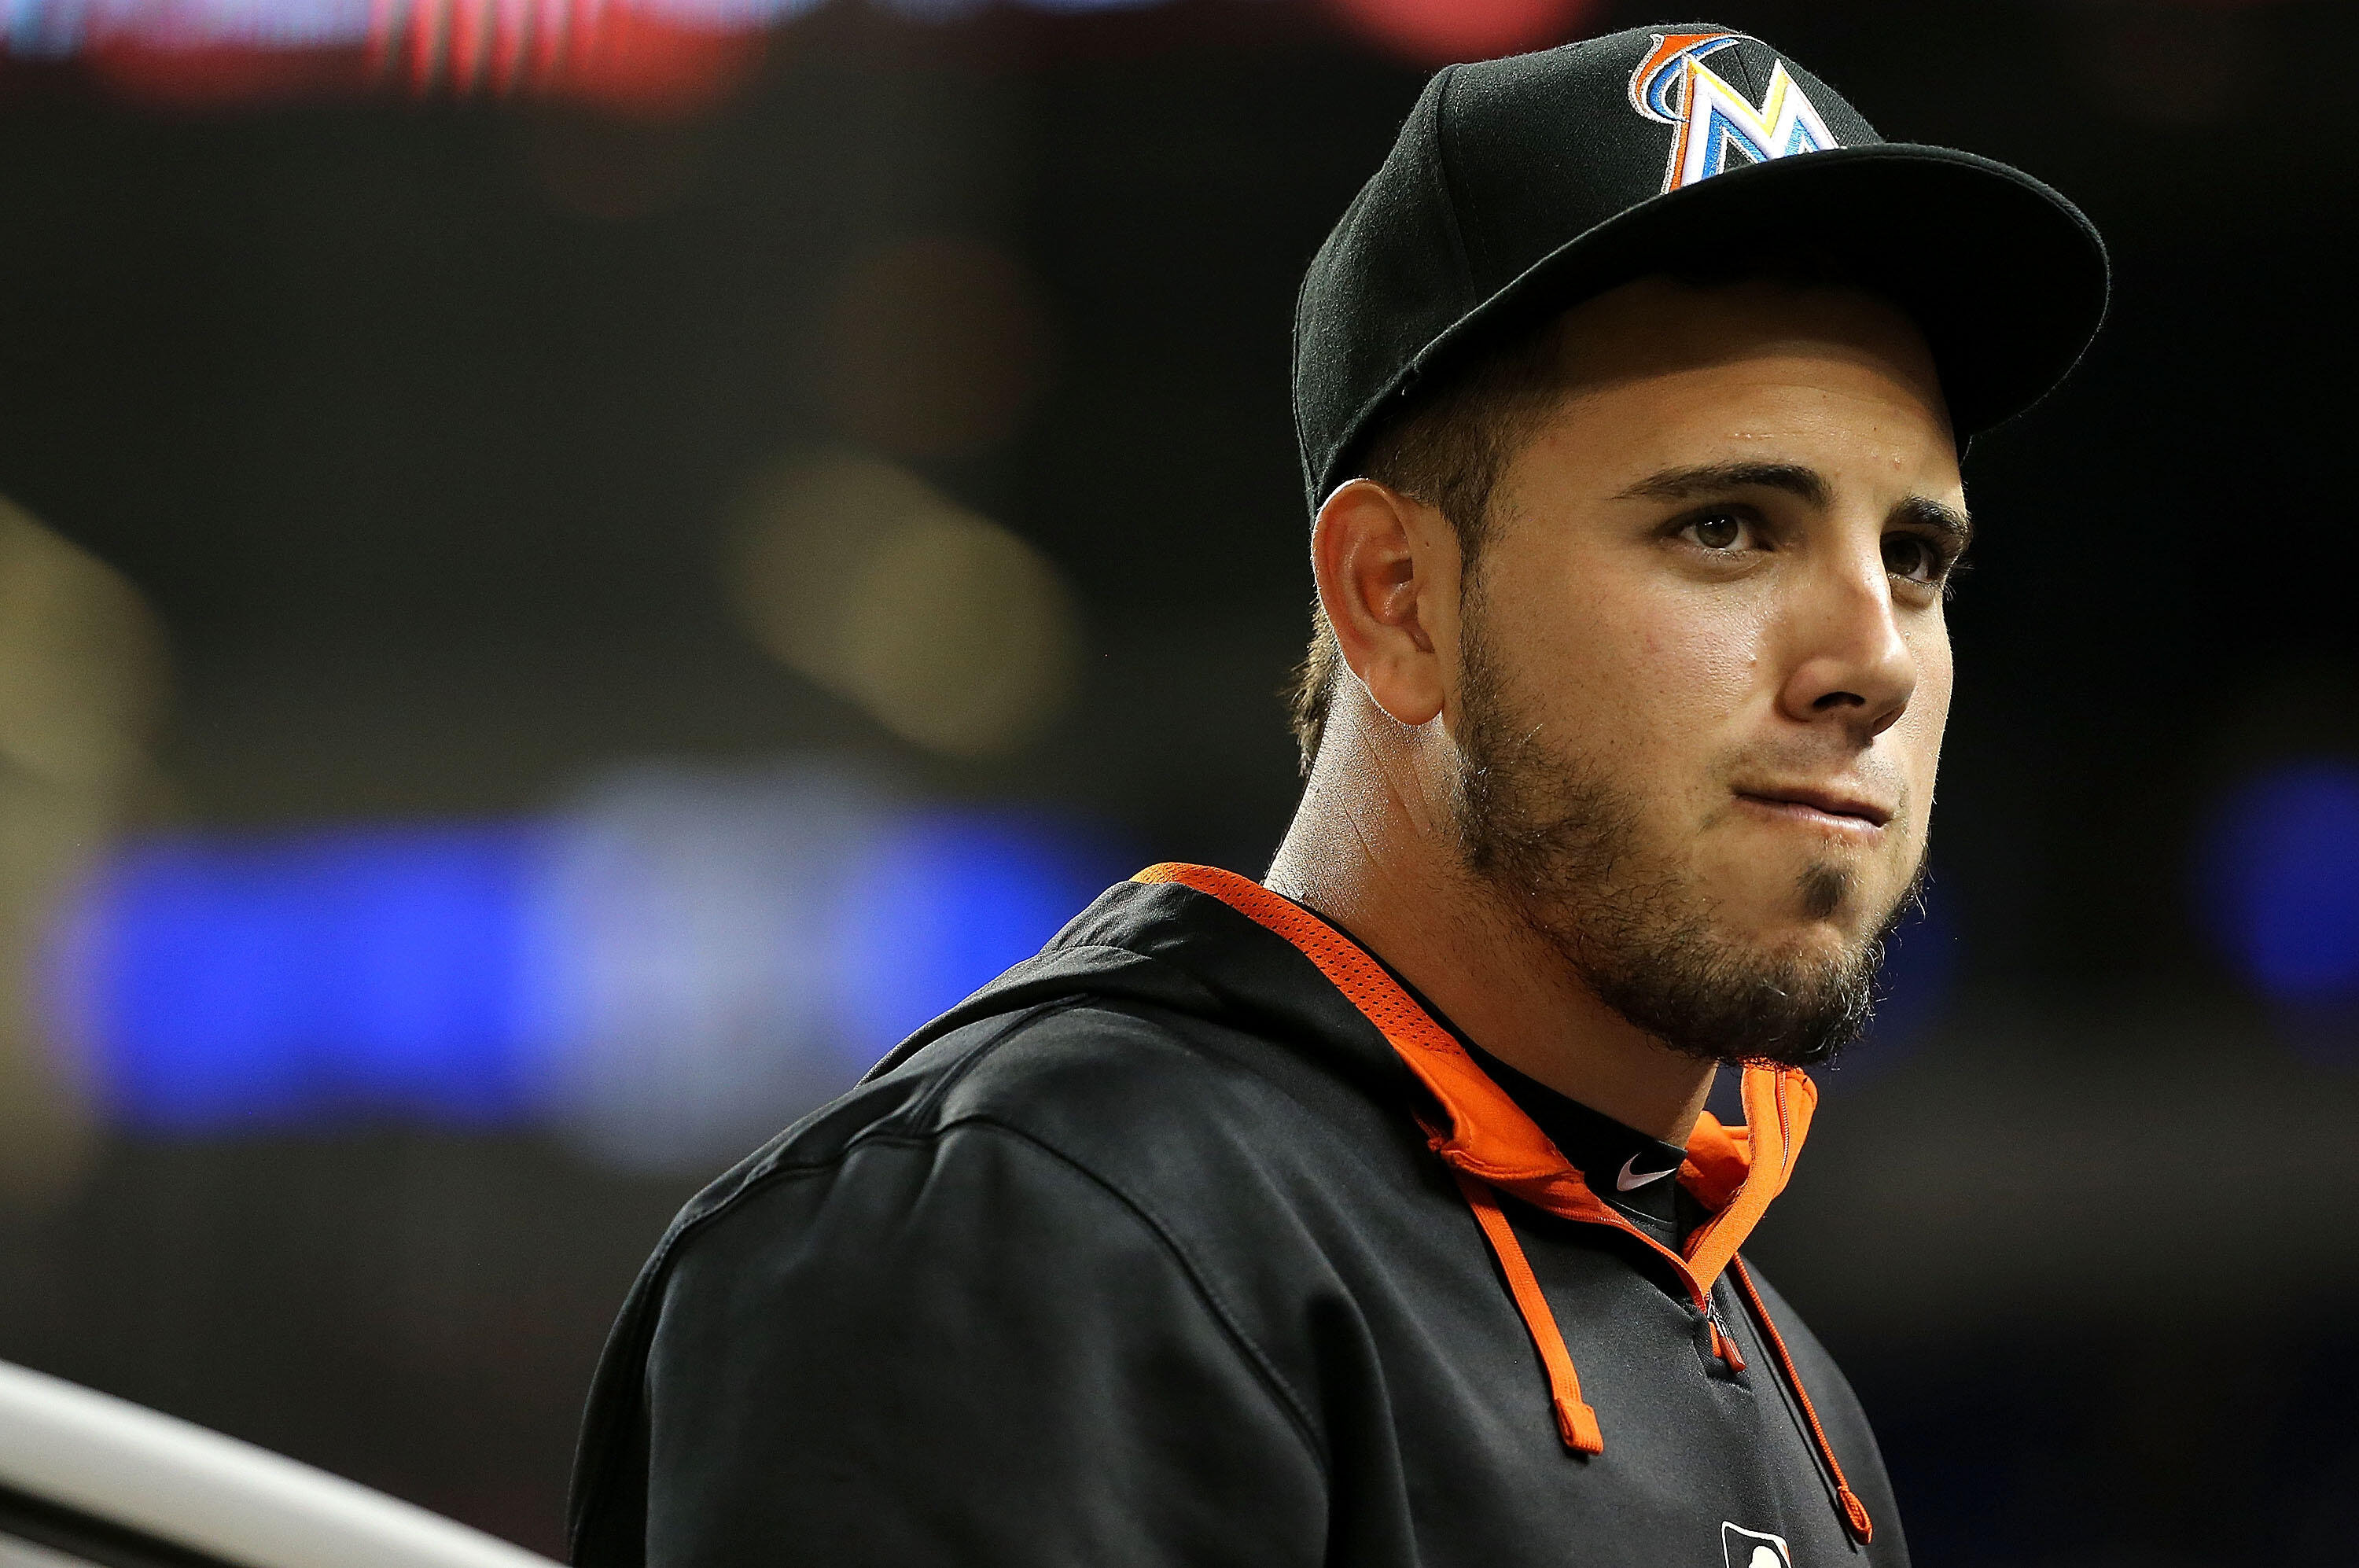 Late Miami Marlins pitcher Jose Fernandez was framed in deadly boat crash  investigation, lawyer claims